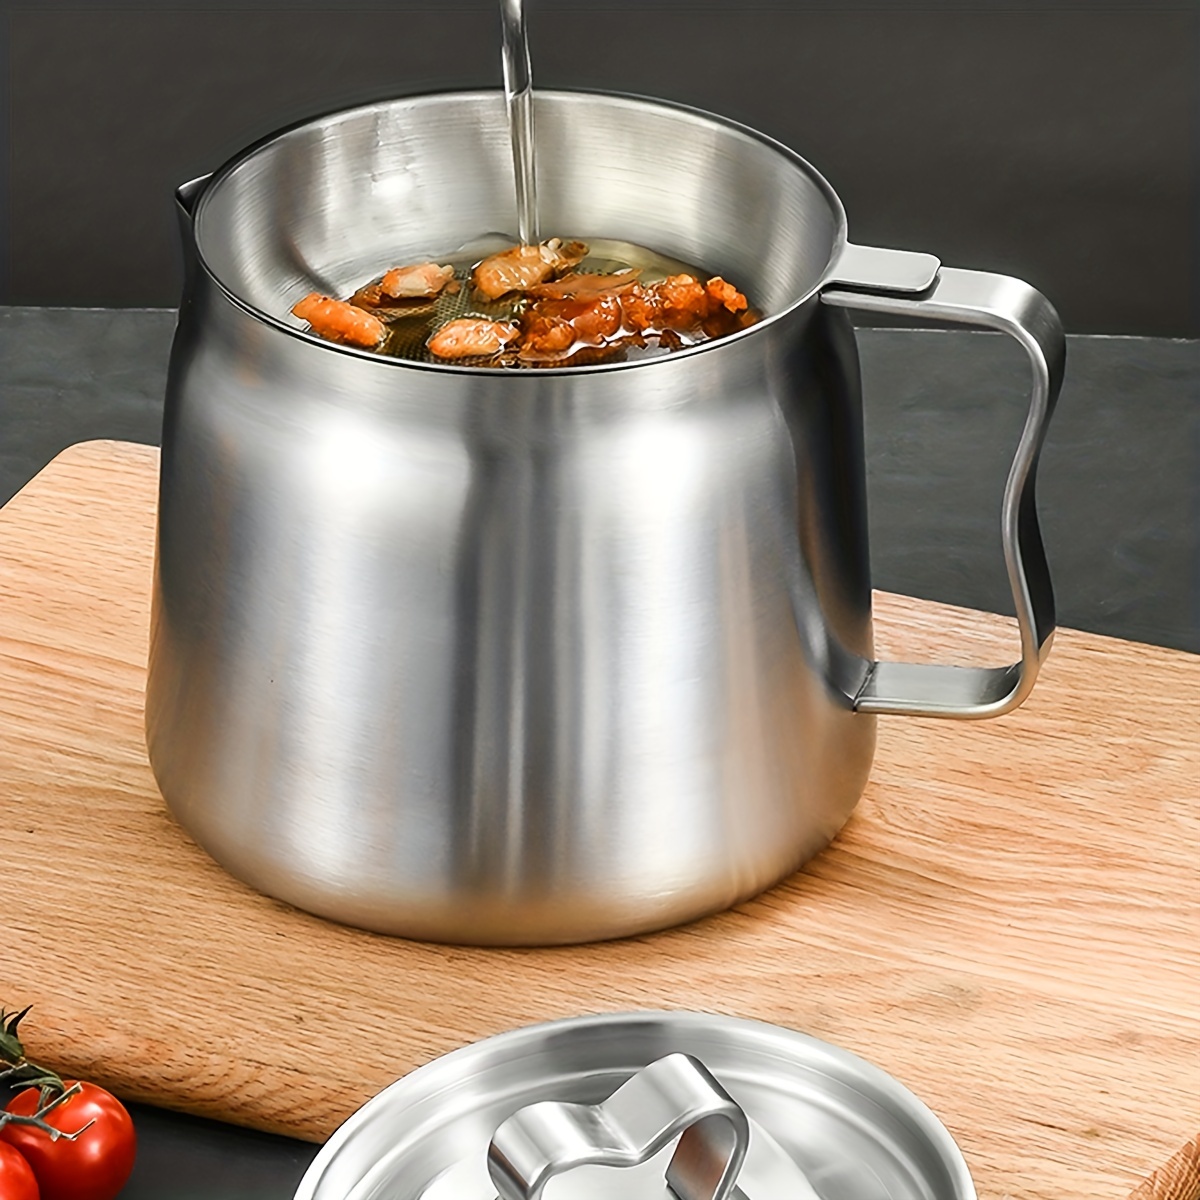 304 Stainless Steel Grease Strainer and Container - 1.2 Storage